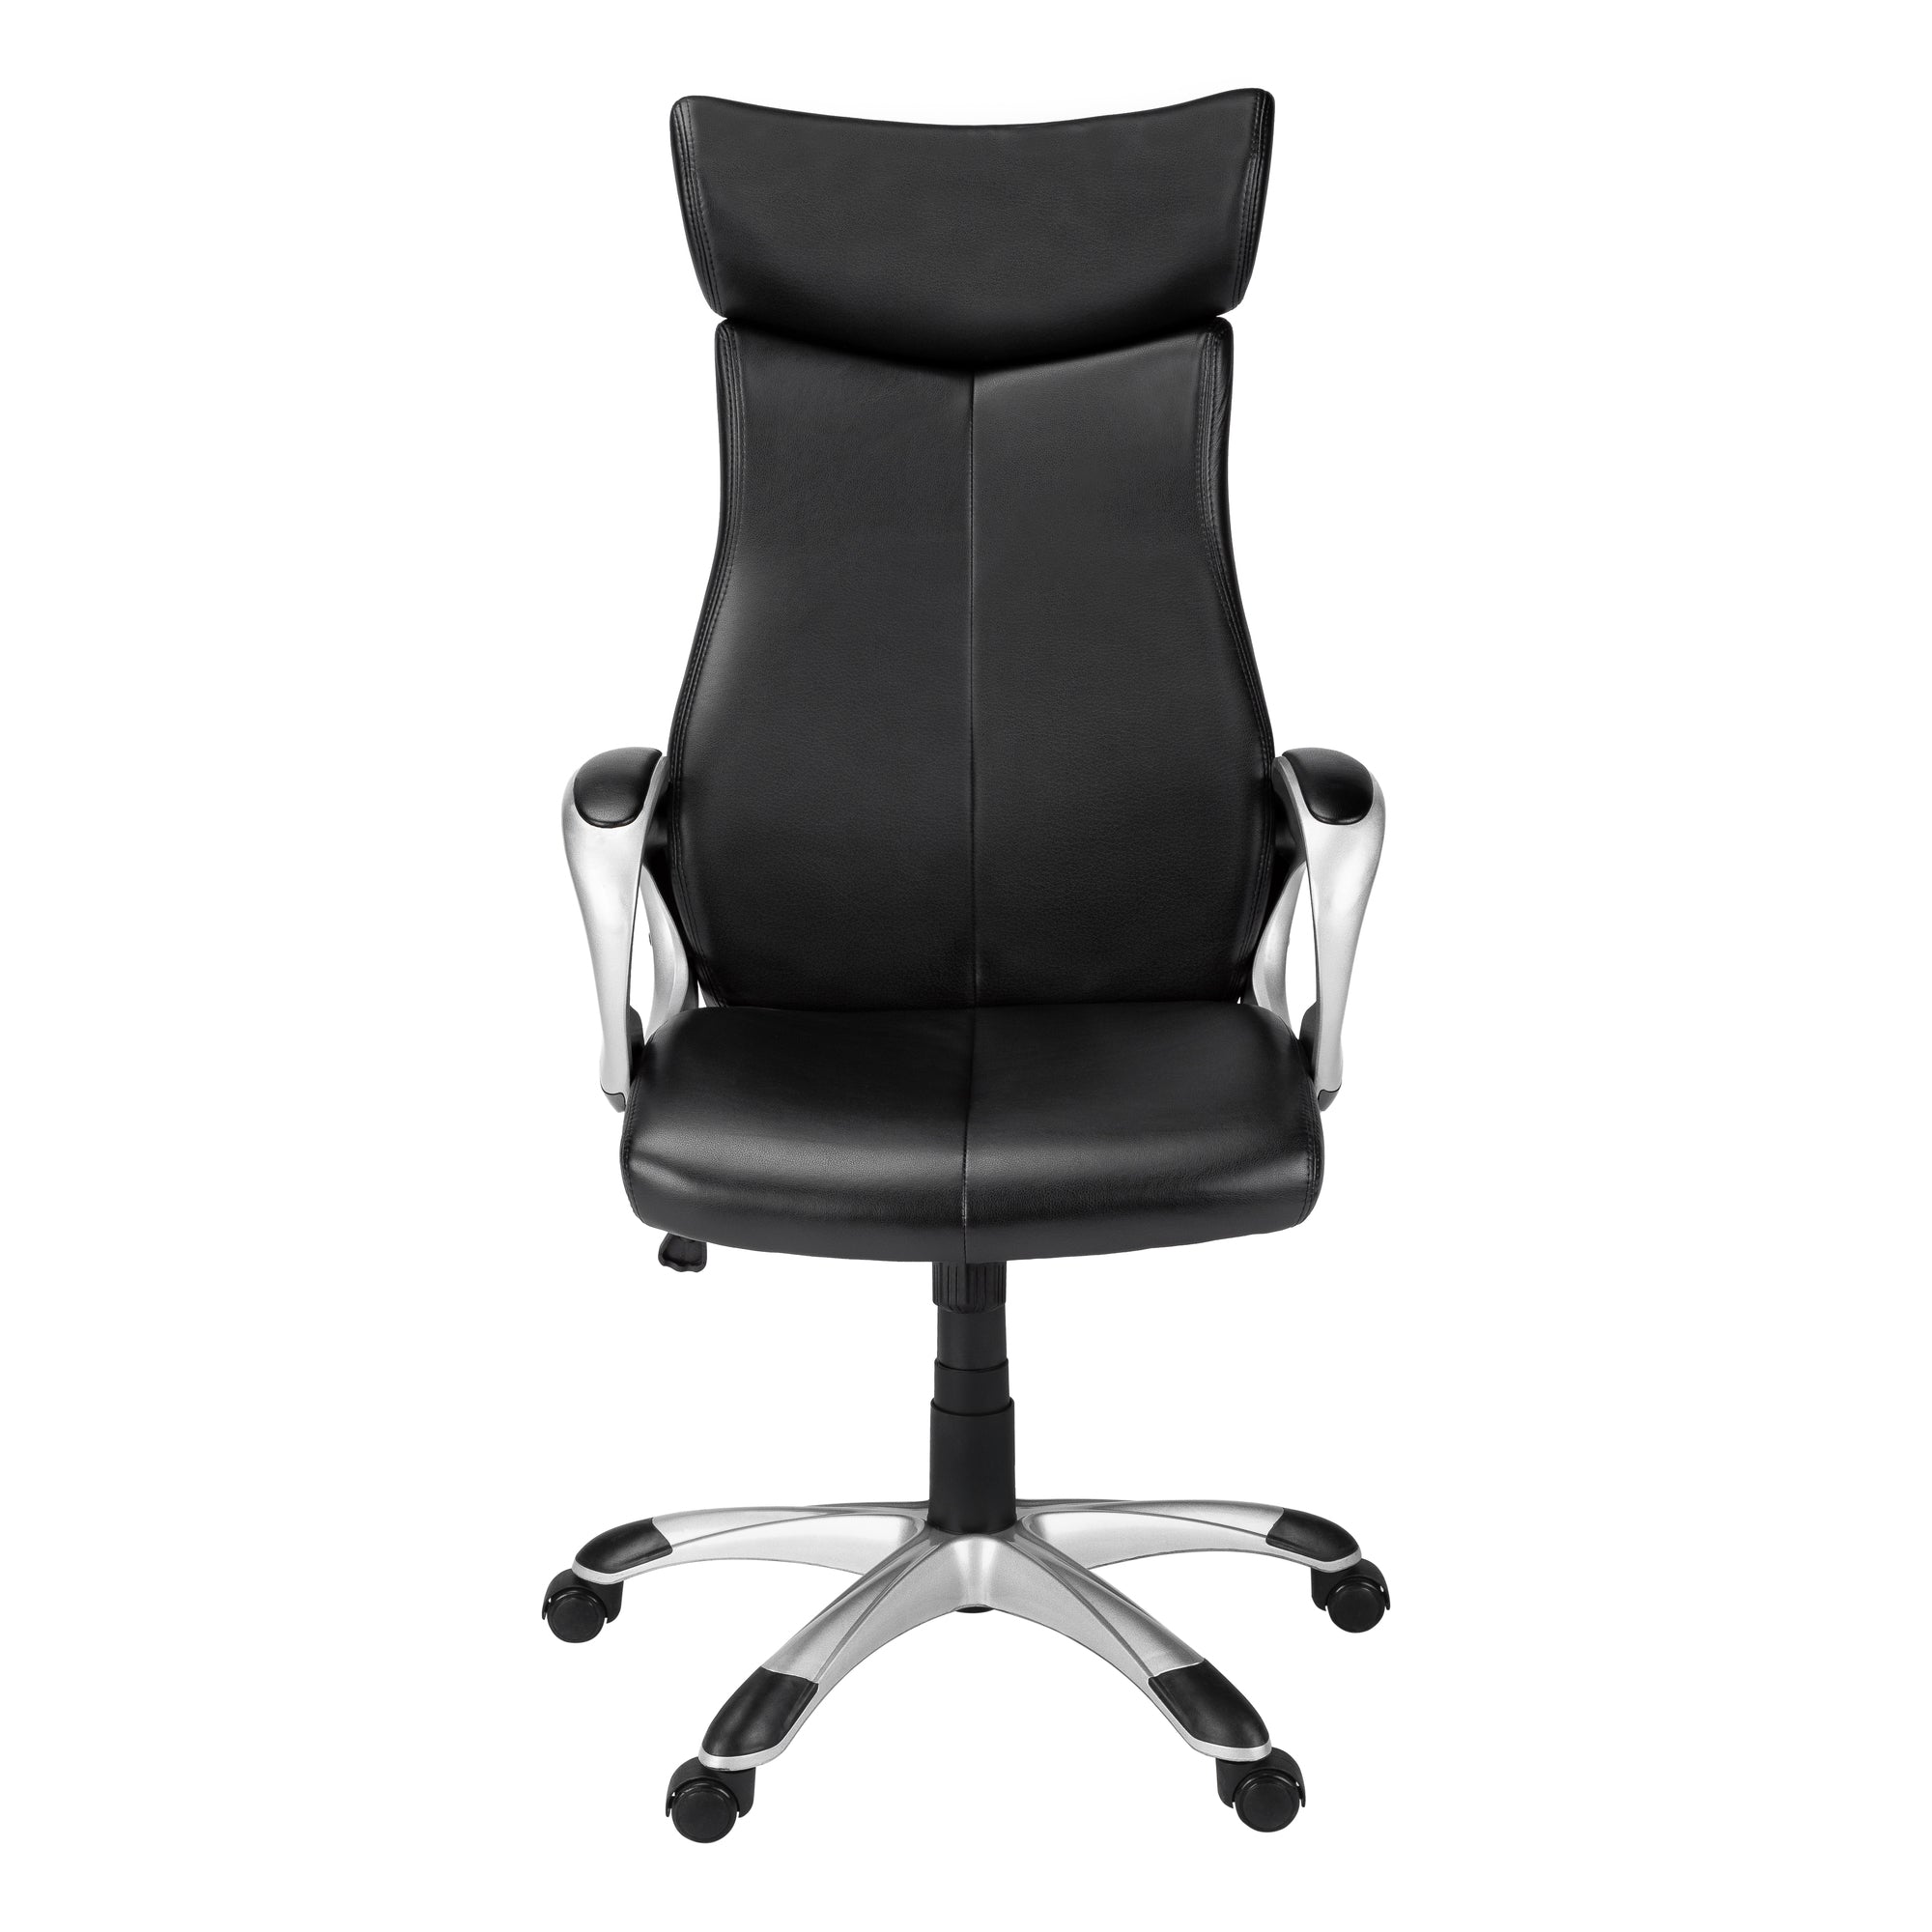 Black-Faux-Leather-Tufted-Seat-Swivel-Adjustable-Executive-Chair-Leather-Back-Steel-Frame-Office-Chairs